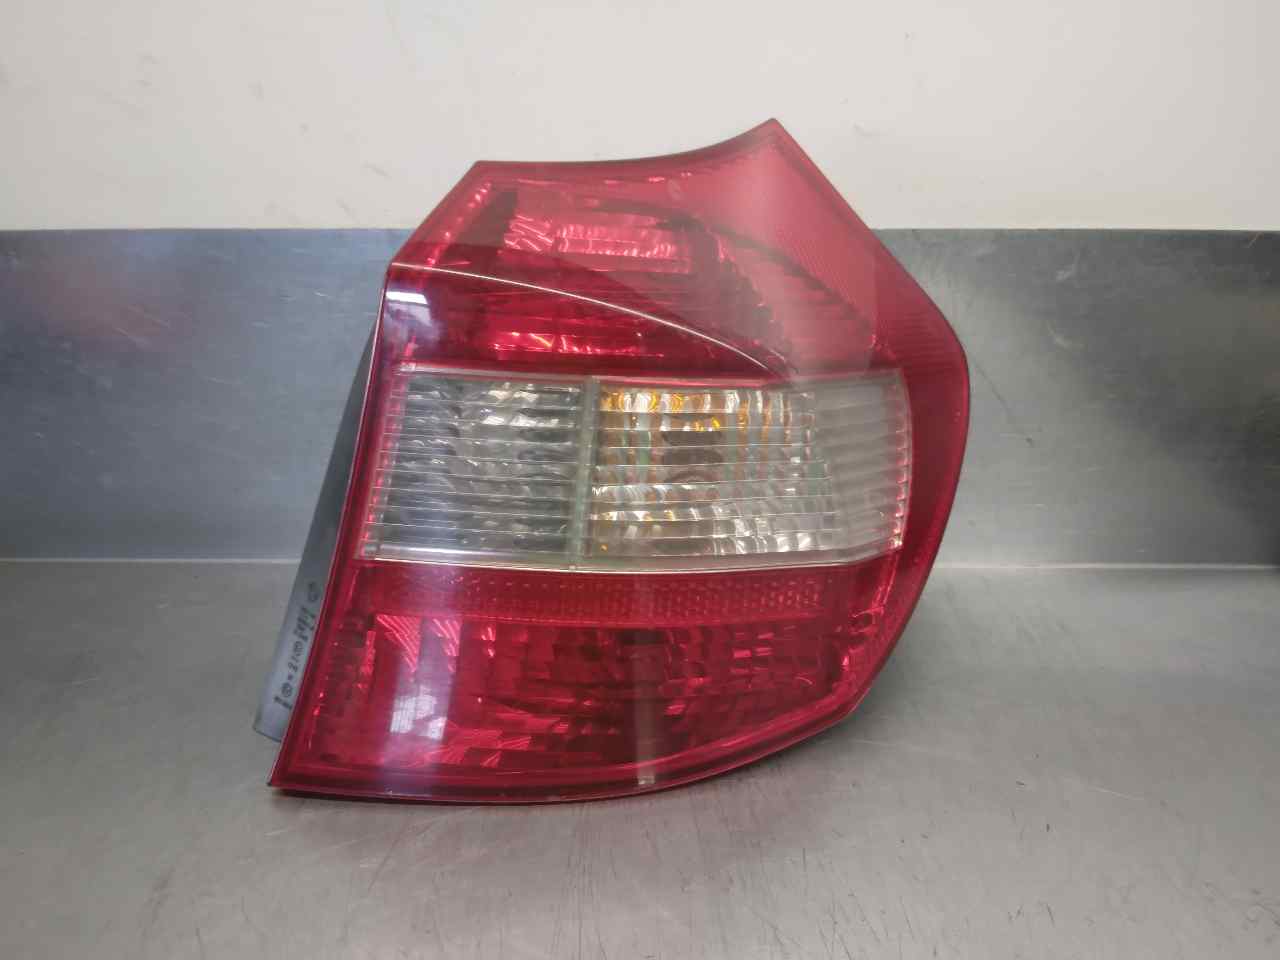 BMW 1 Series F20/F21 (2011-2020) Rear Right Taillight Lamp 63216924502, 5PUERTAS 19827616